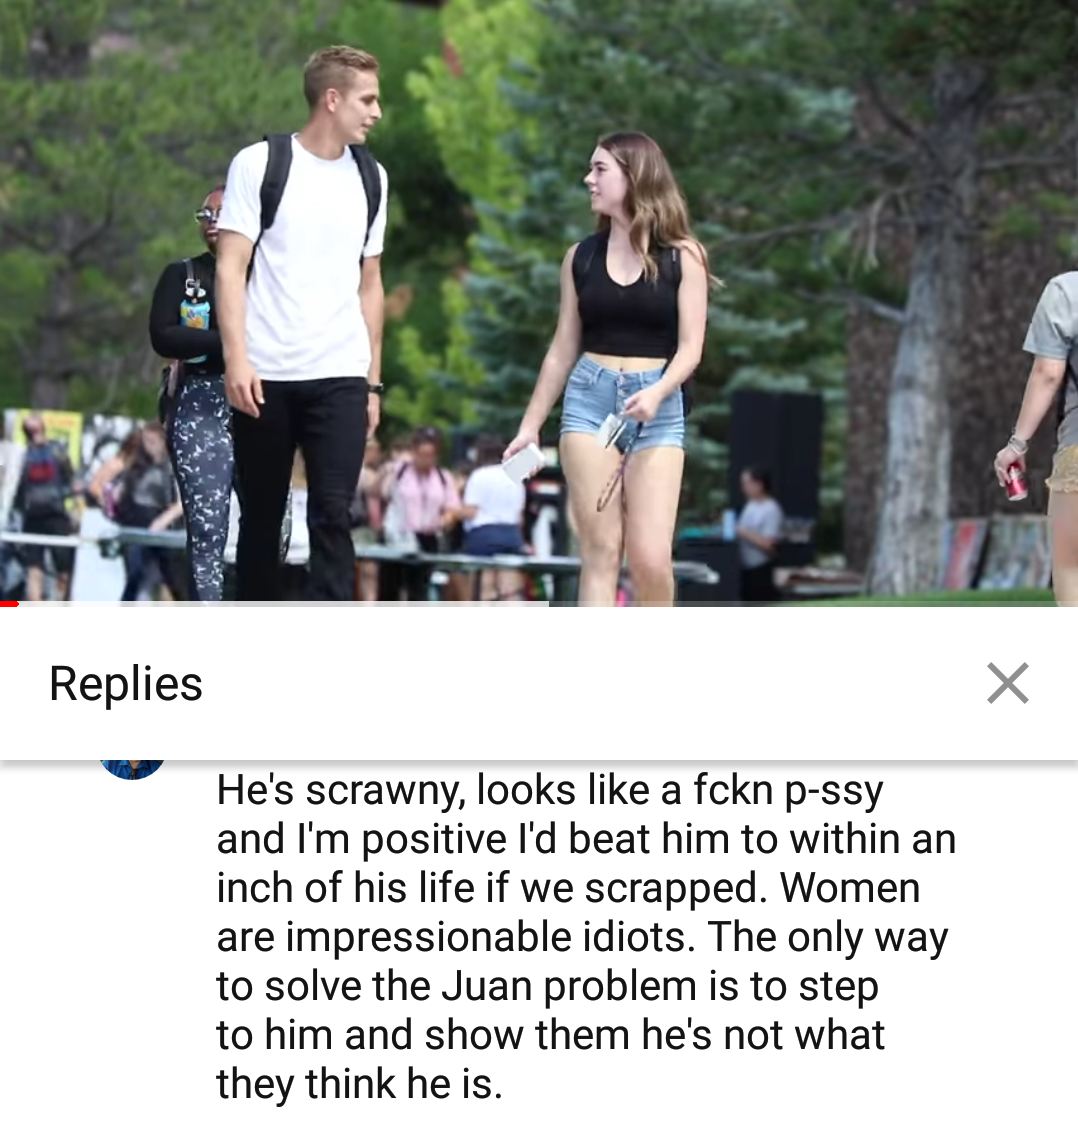 photo caption - Replies He's scrawny, looks a fckn pssy and I'm positive I'd beat him to within an inch of his life if we scrapped. Women are impressionable idiots. The only way to solve the Juan problem is to step to him and show them he's not what they 